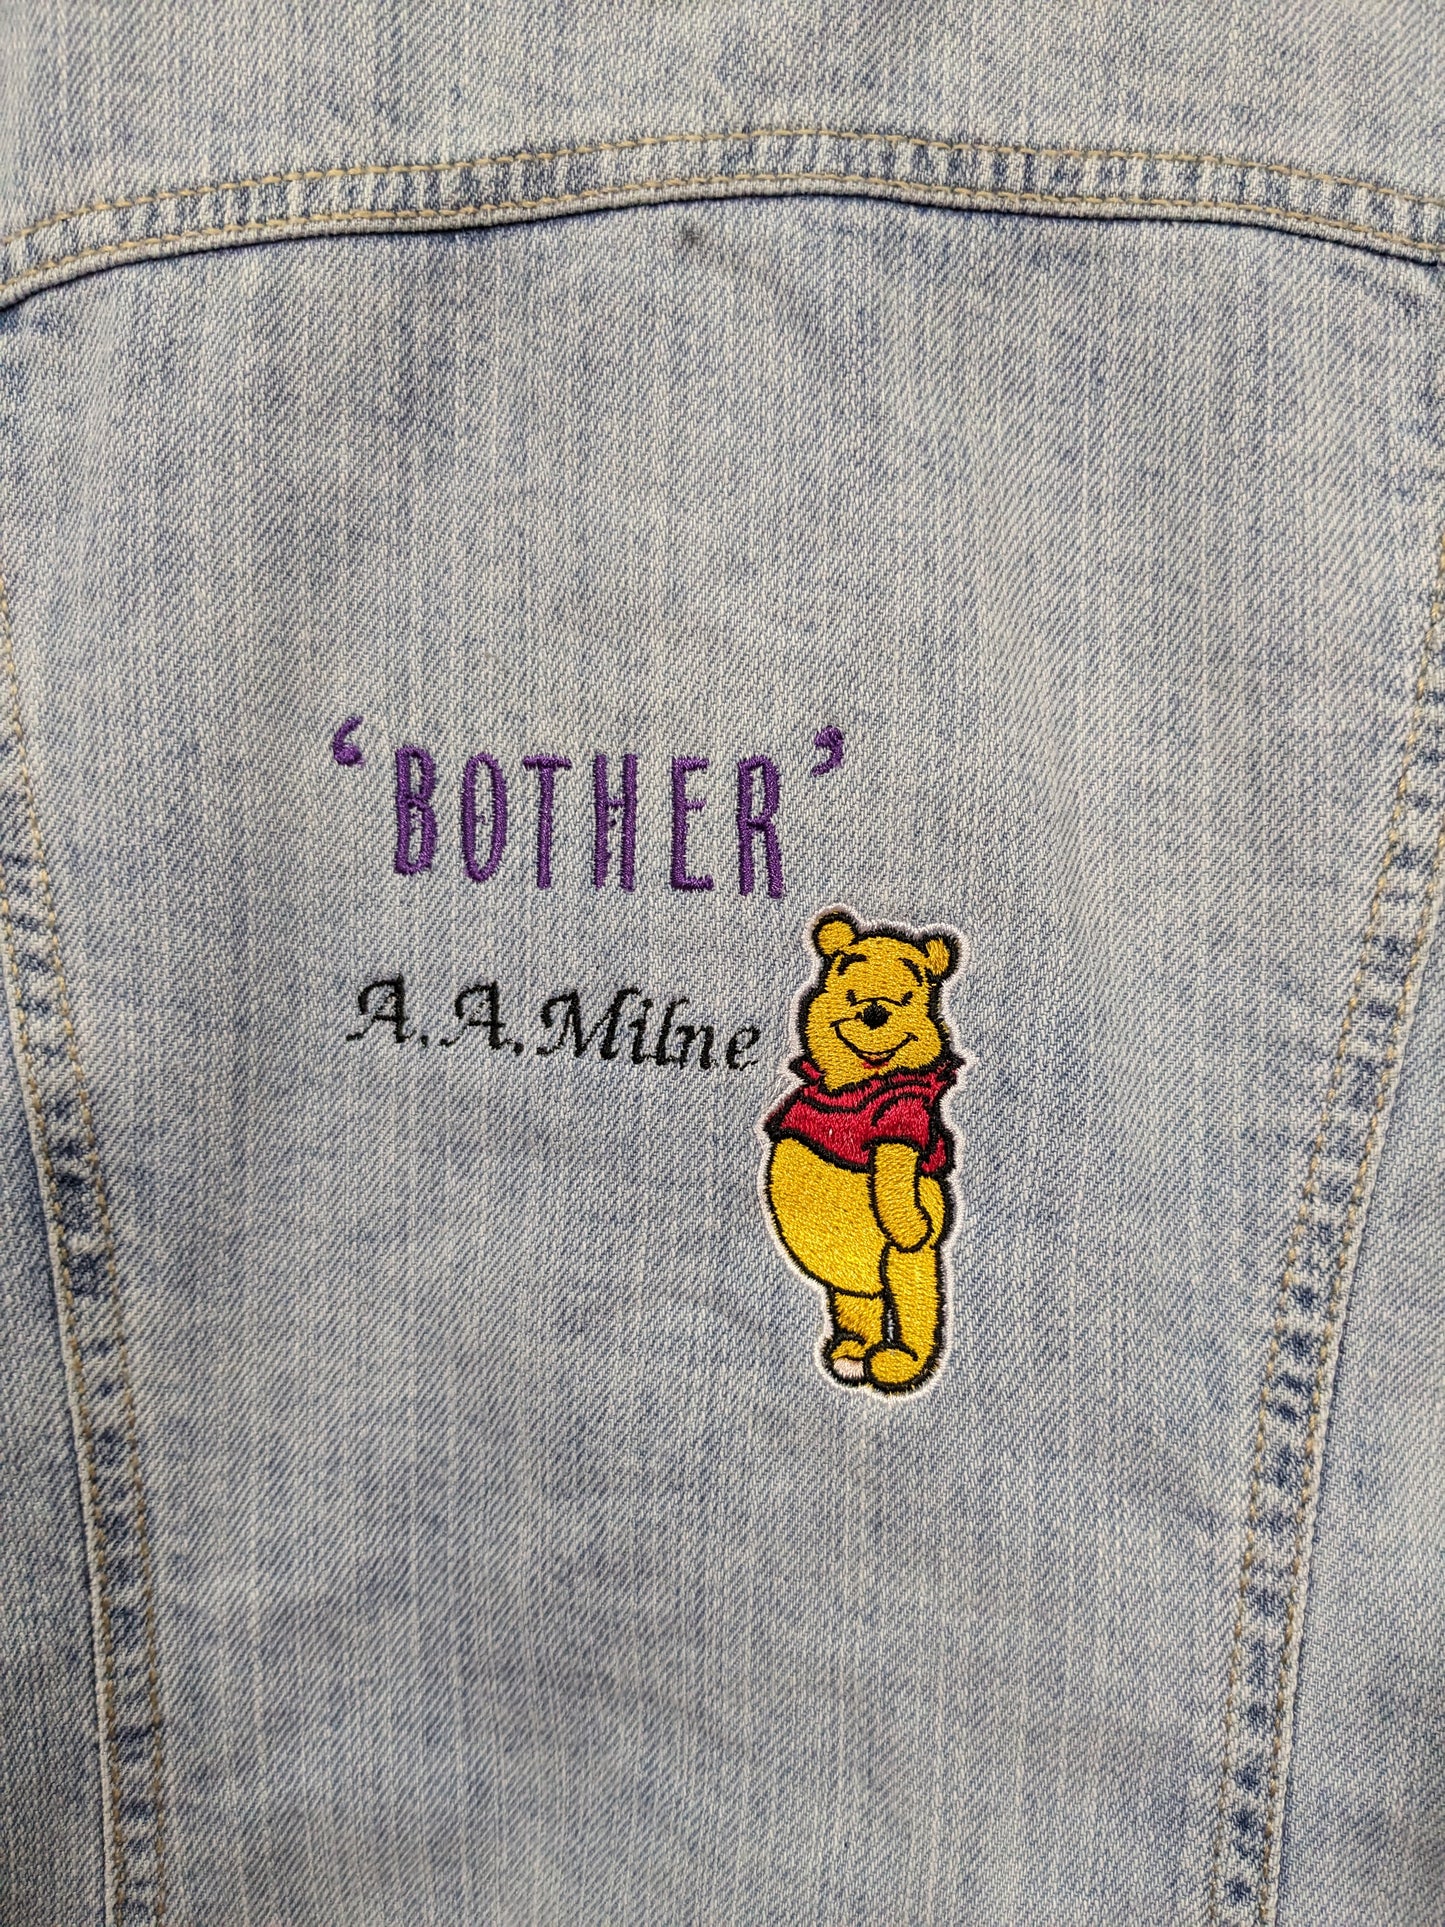 Size 12 Light Blue Denim Jacket - Reworked - Embroidered Winnie the Pooh, A. A. Milne Quote -